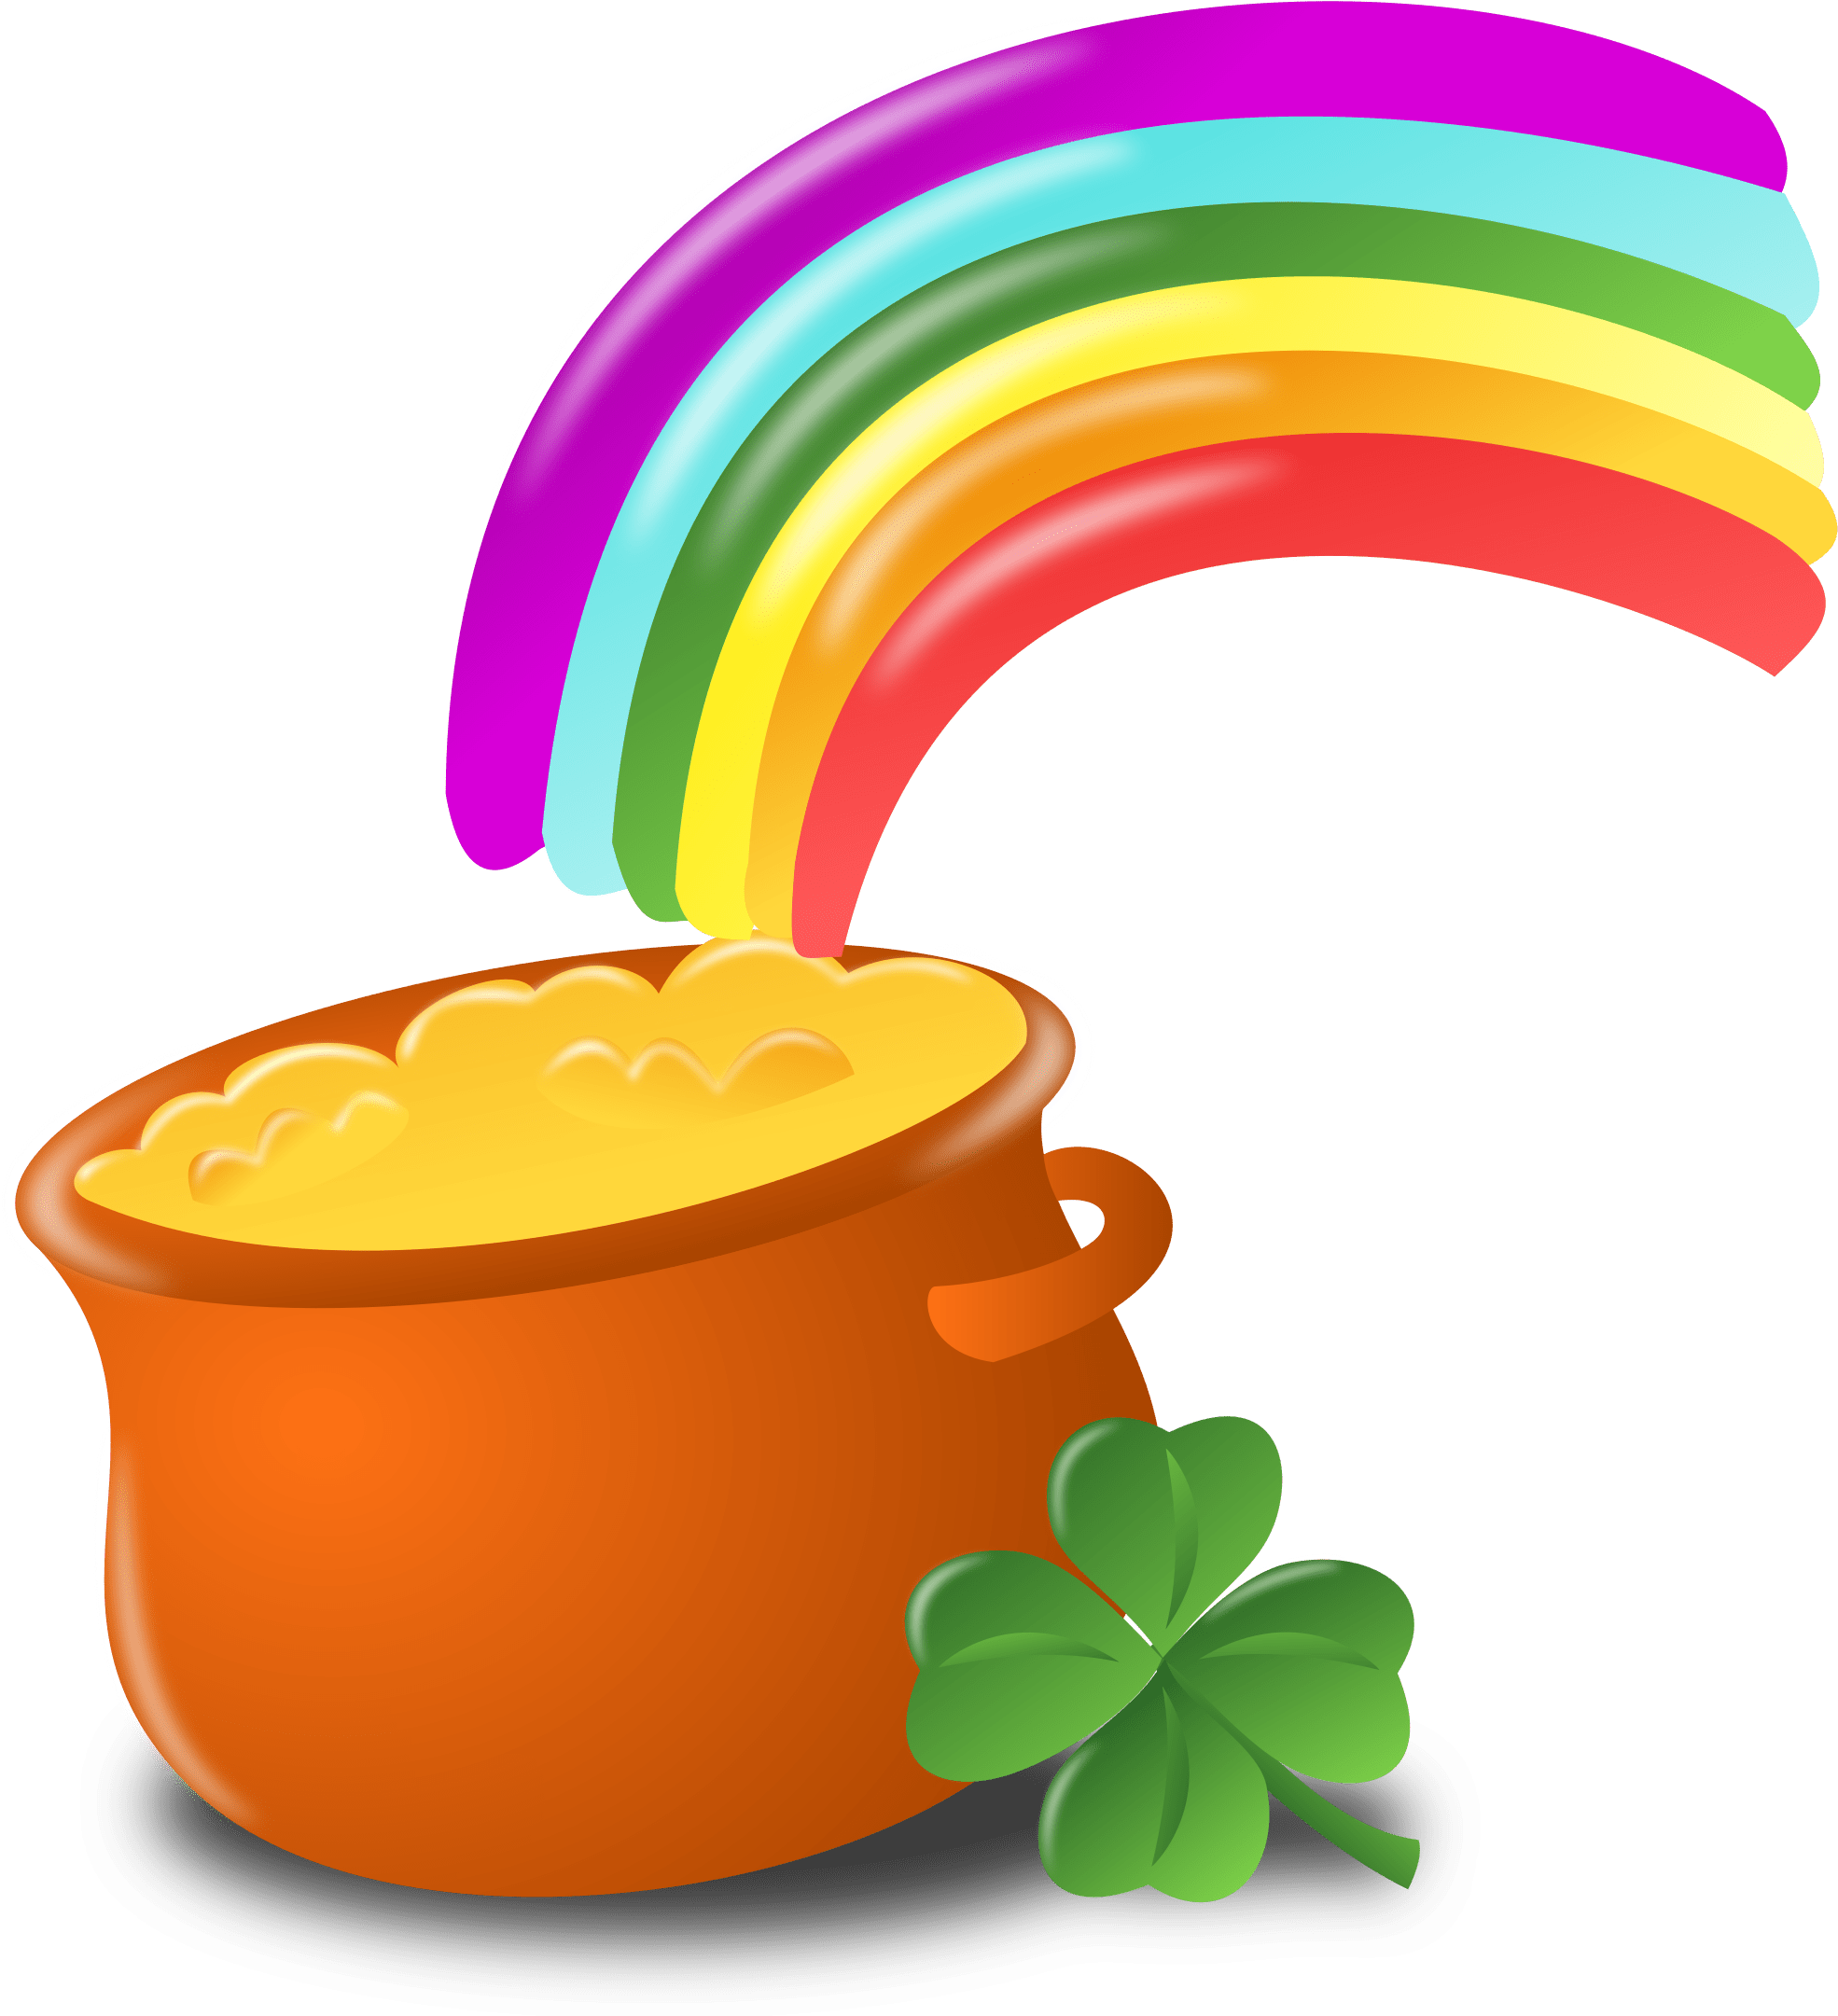 Saint Patrick's Day A Great Day For Personal Finance - St Patrick's Day Clip Art (2400x2400)